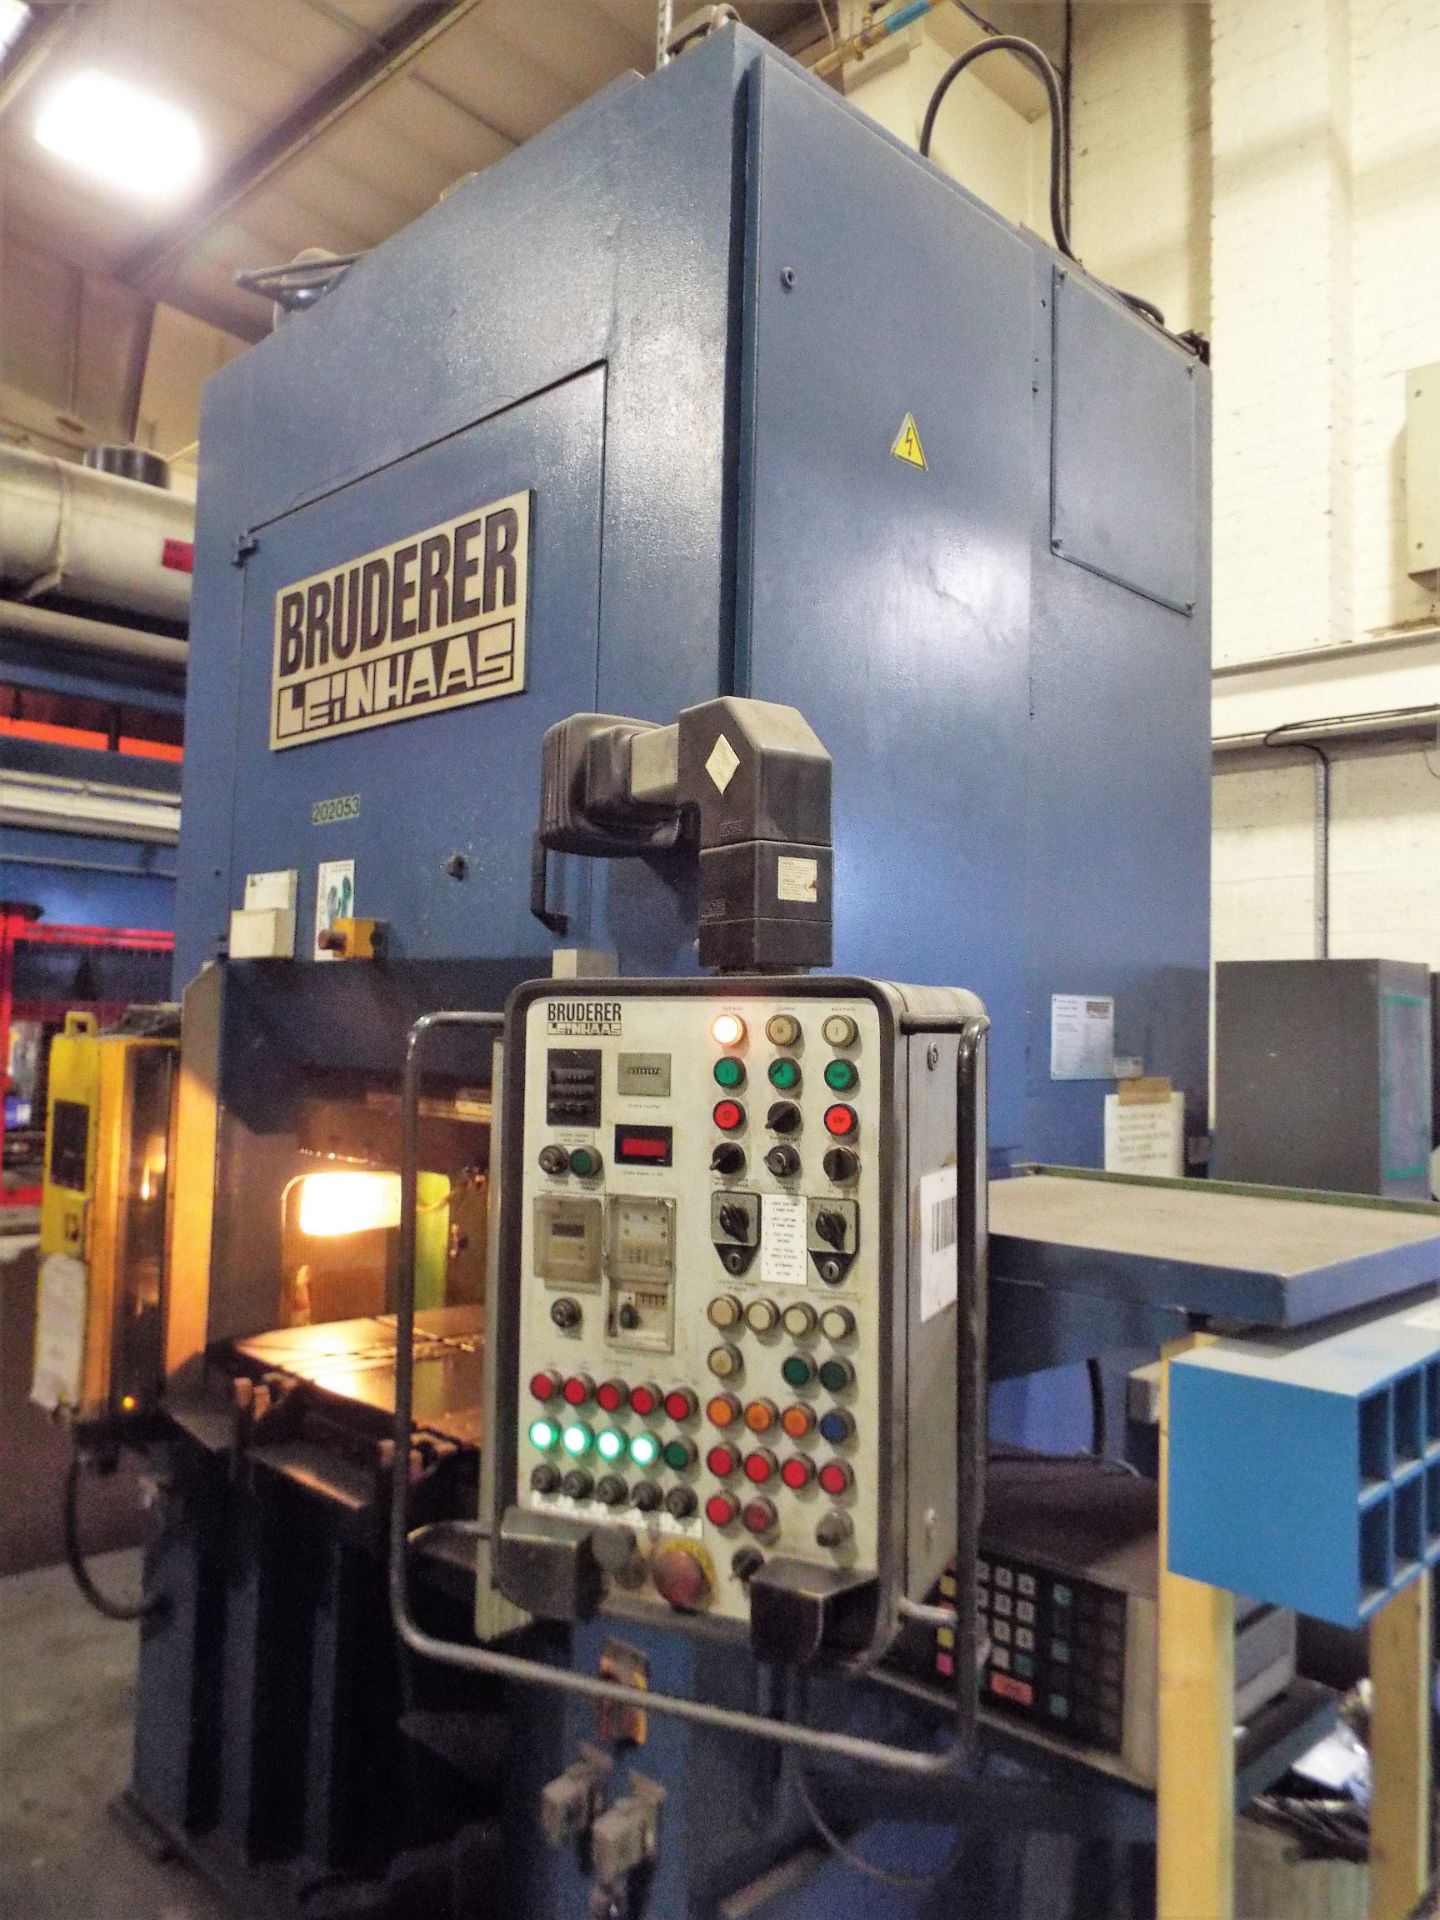 Bruderer Leinhaas DWP-R11-100-NS Single Column Differential High Speed Hydraulic Press - Image 4 of 10